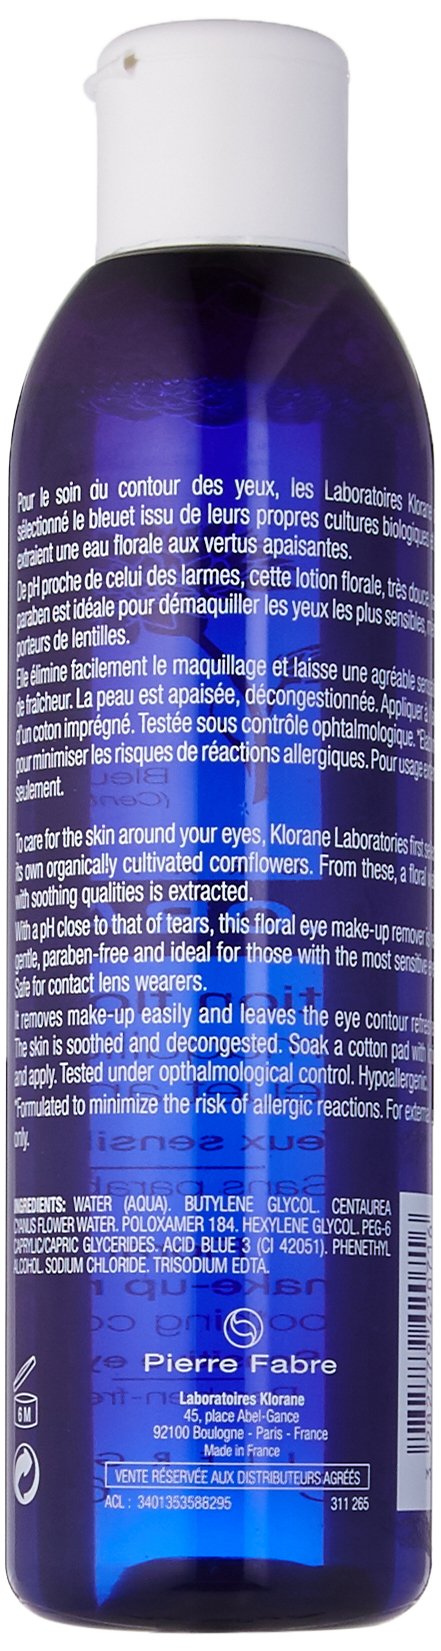 Klorane Floral Lotion Eye Make-up Remover with Soothing Cornflower for Sensitive Skin, Oil, Frangrance and Sulfate Free 6.7 fl.oz. - $21.95